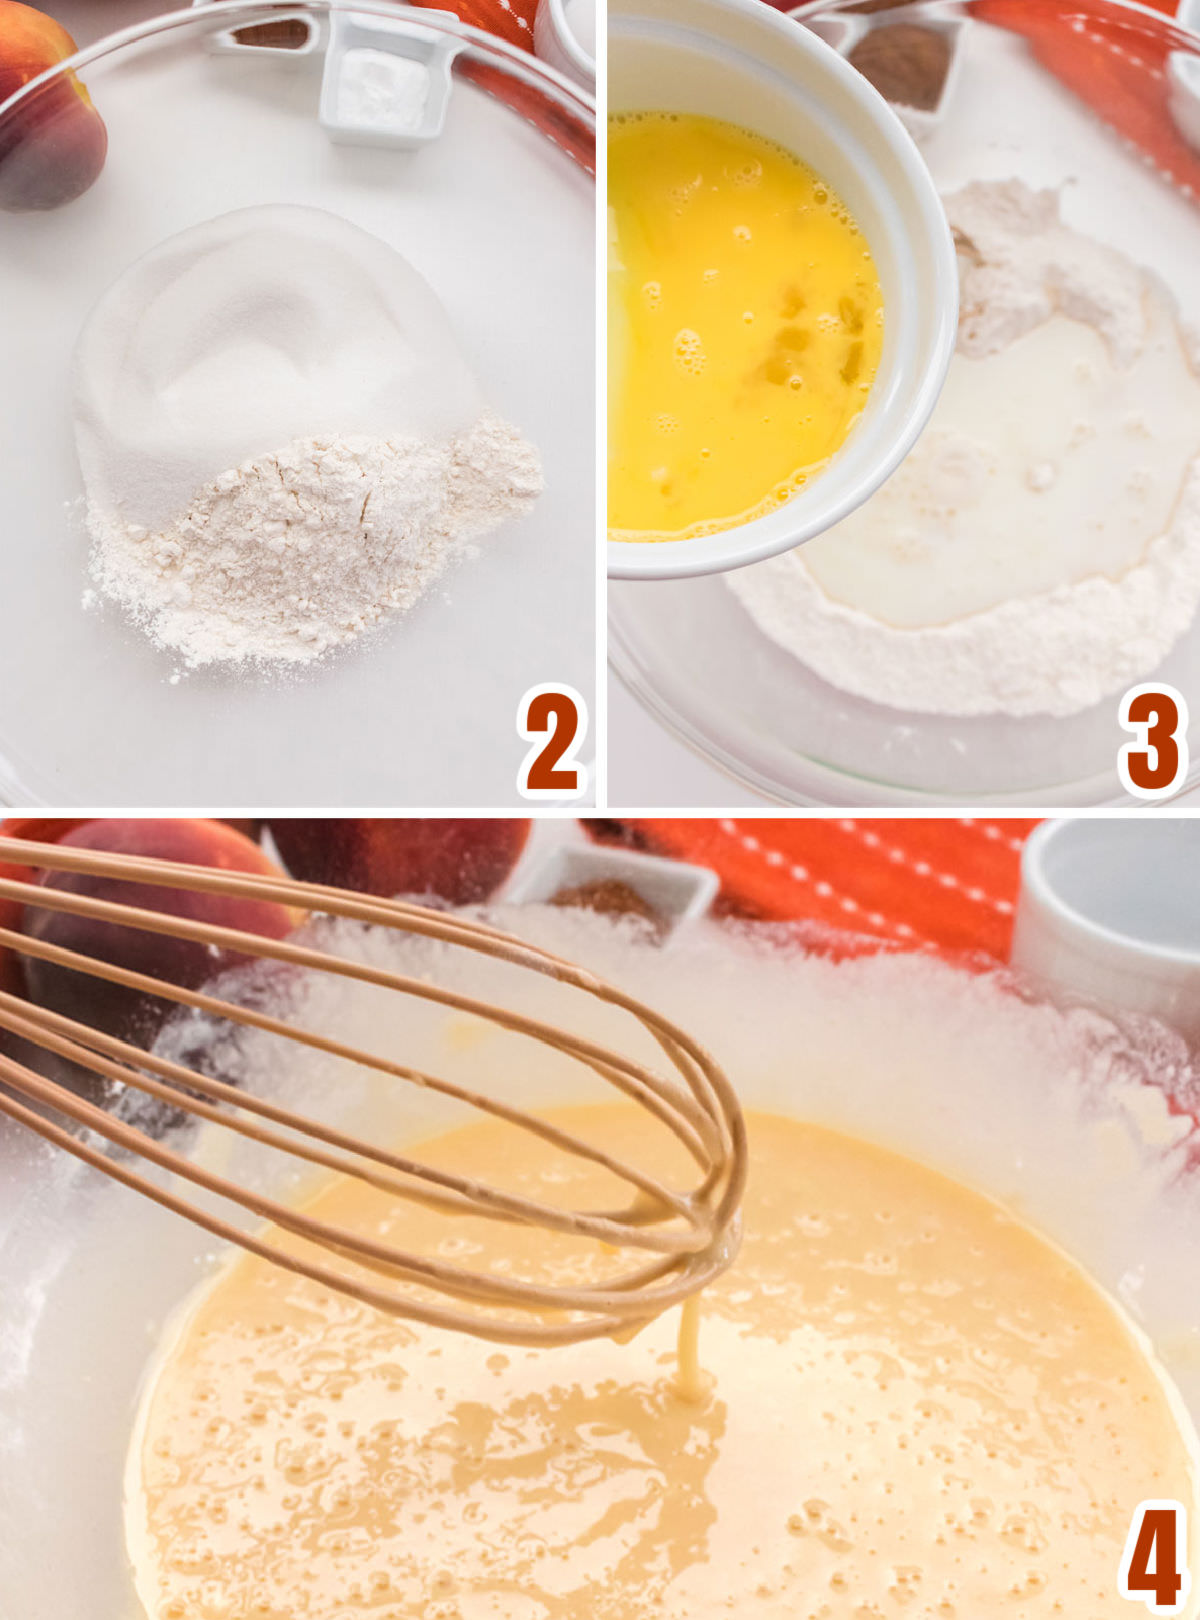 Collage image showing the steps for making the Peach Cobbler batter.